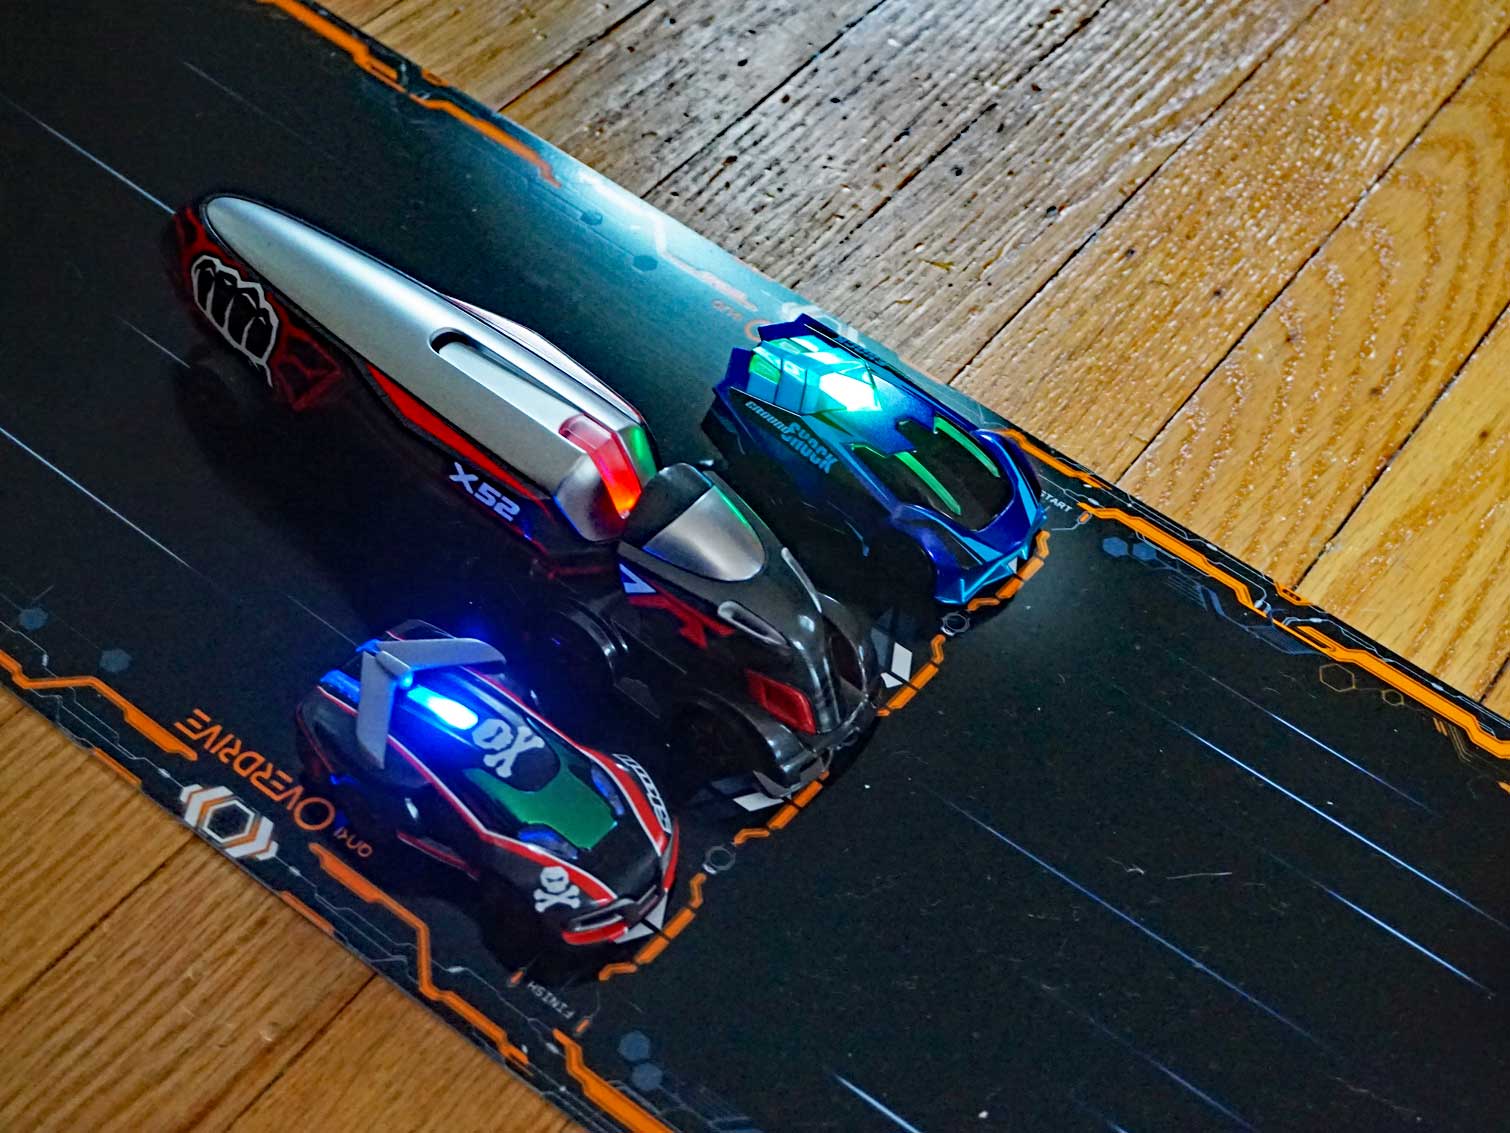 Anki Overdrive Review Supertrucks Add to Racing Fun Tom's Guide